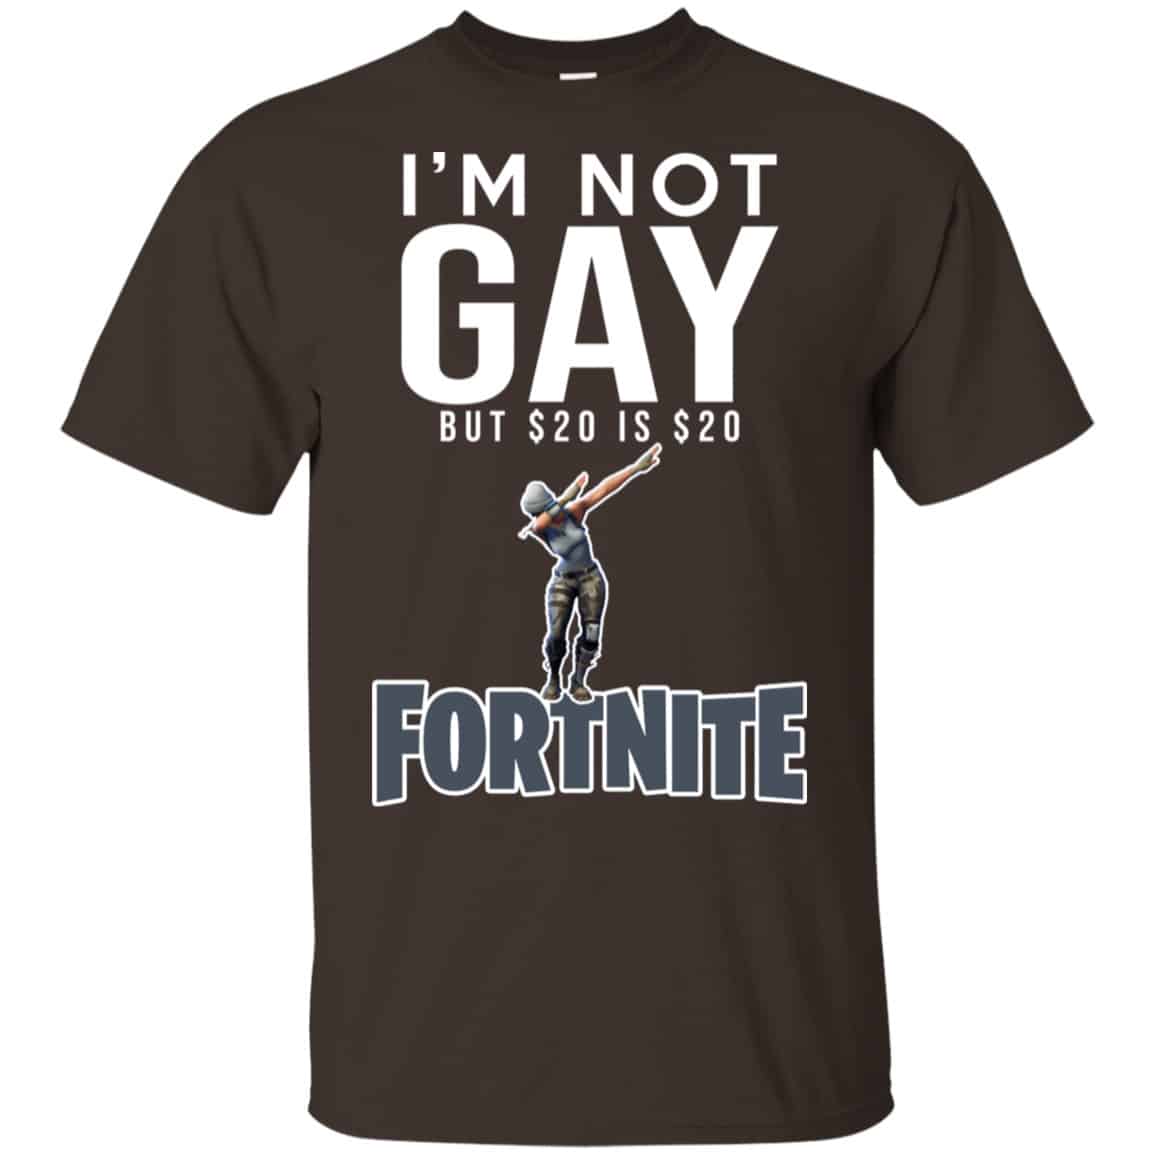 Fortnite: I’m Not Gay But $20 Is $20